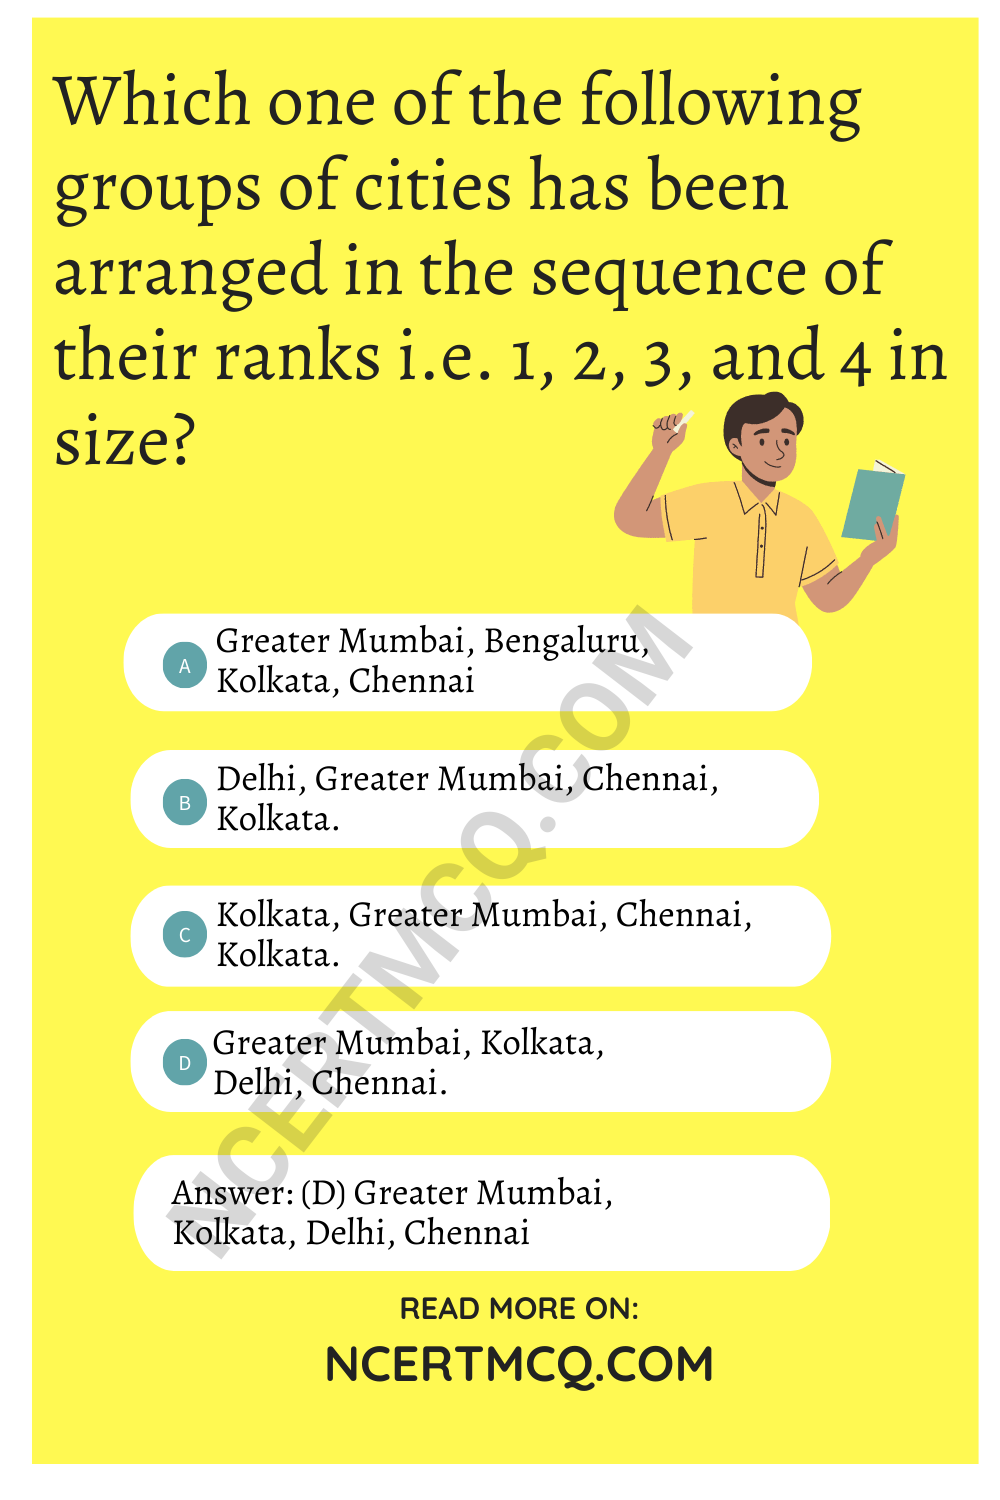 Which one of the following groups of cities has been arranged in the sequence of their ranks i.e. 1, 2, 3, and 4 in size?